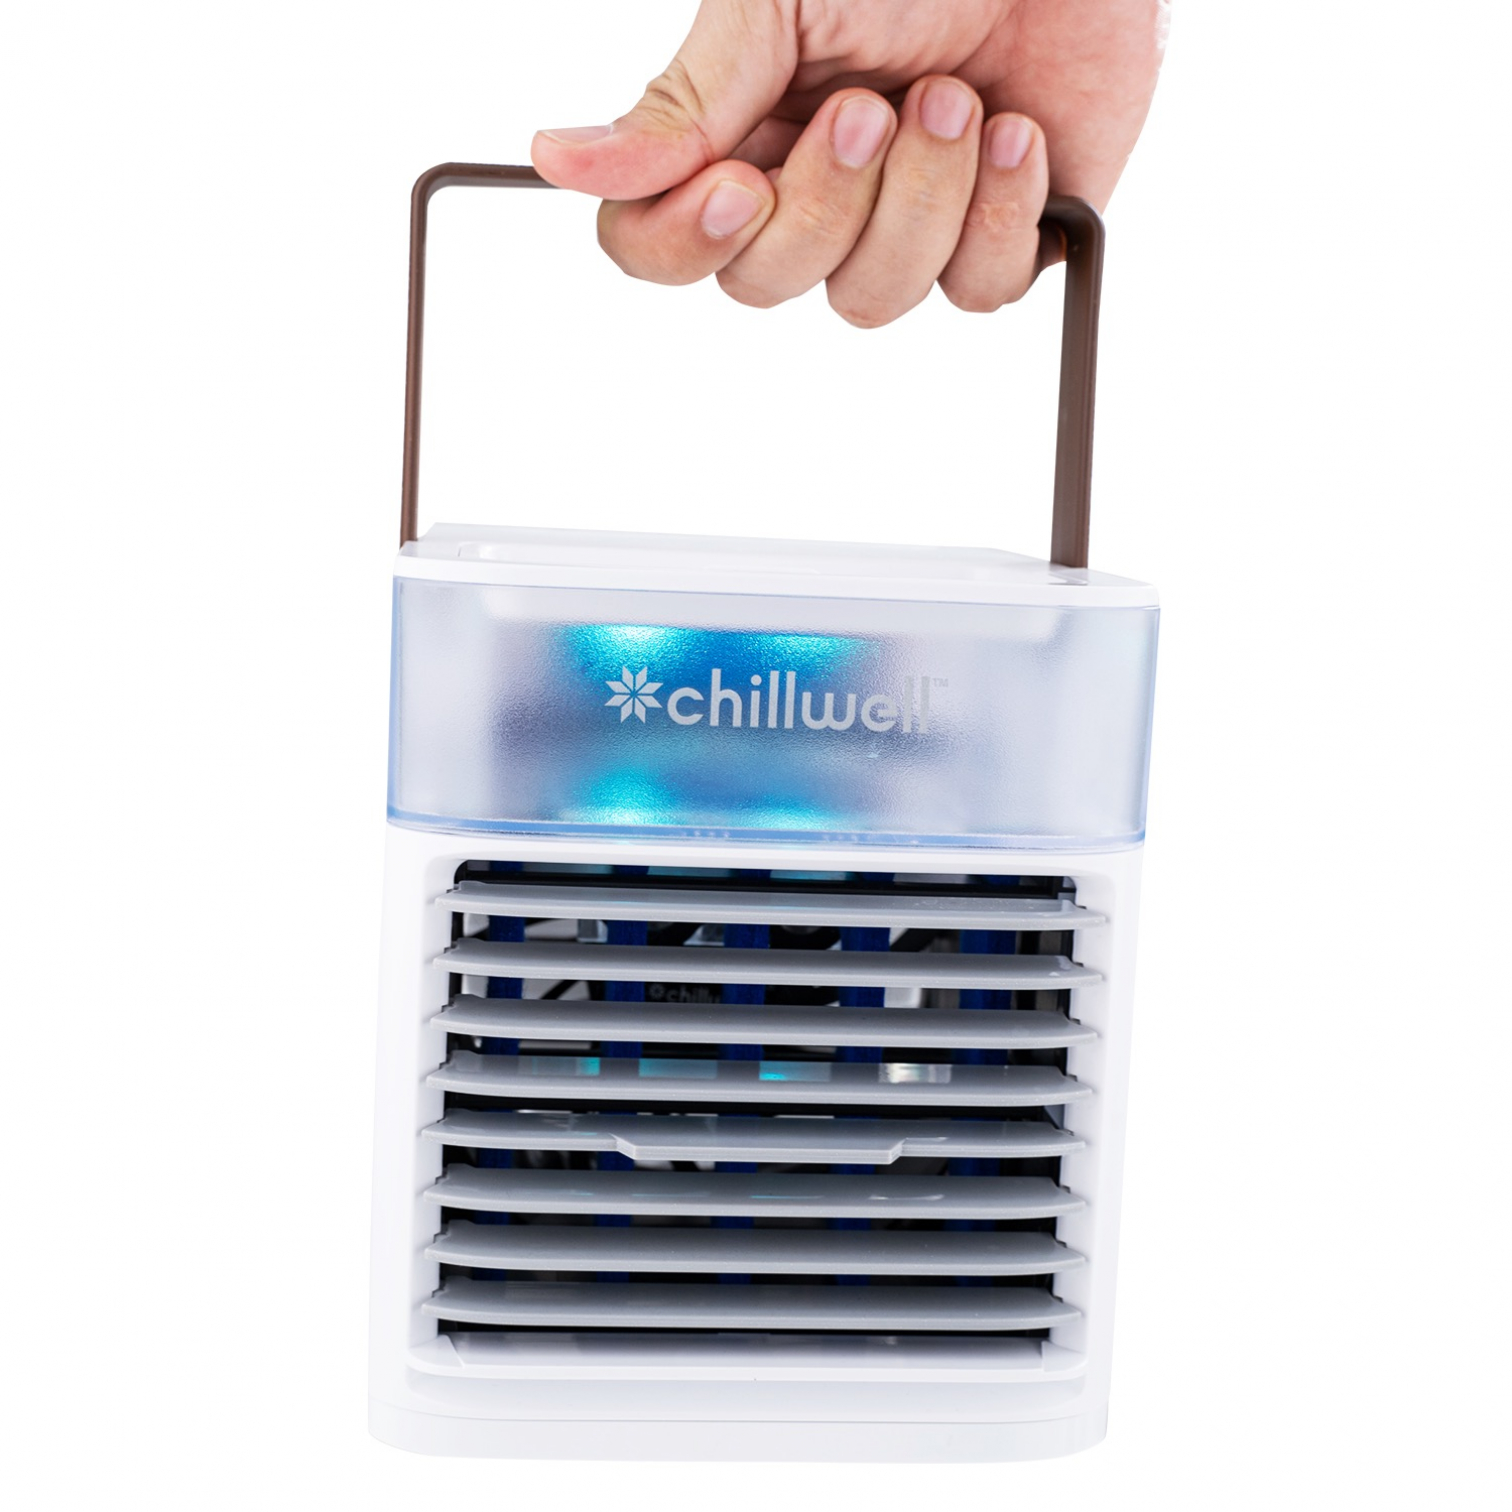 What Is The Best Place To Get Chillwell AC Online